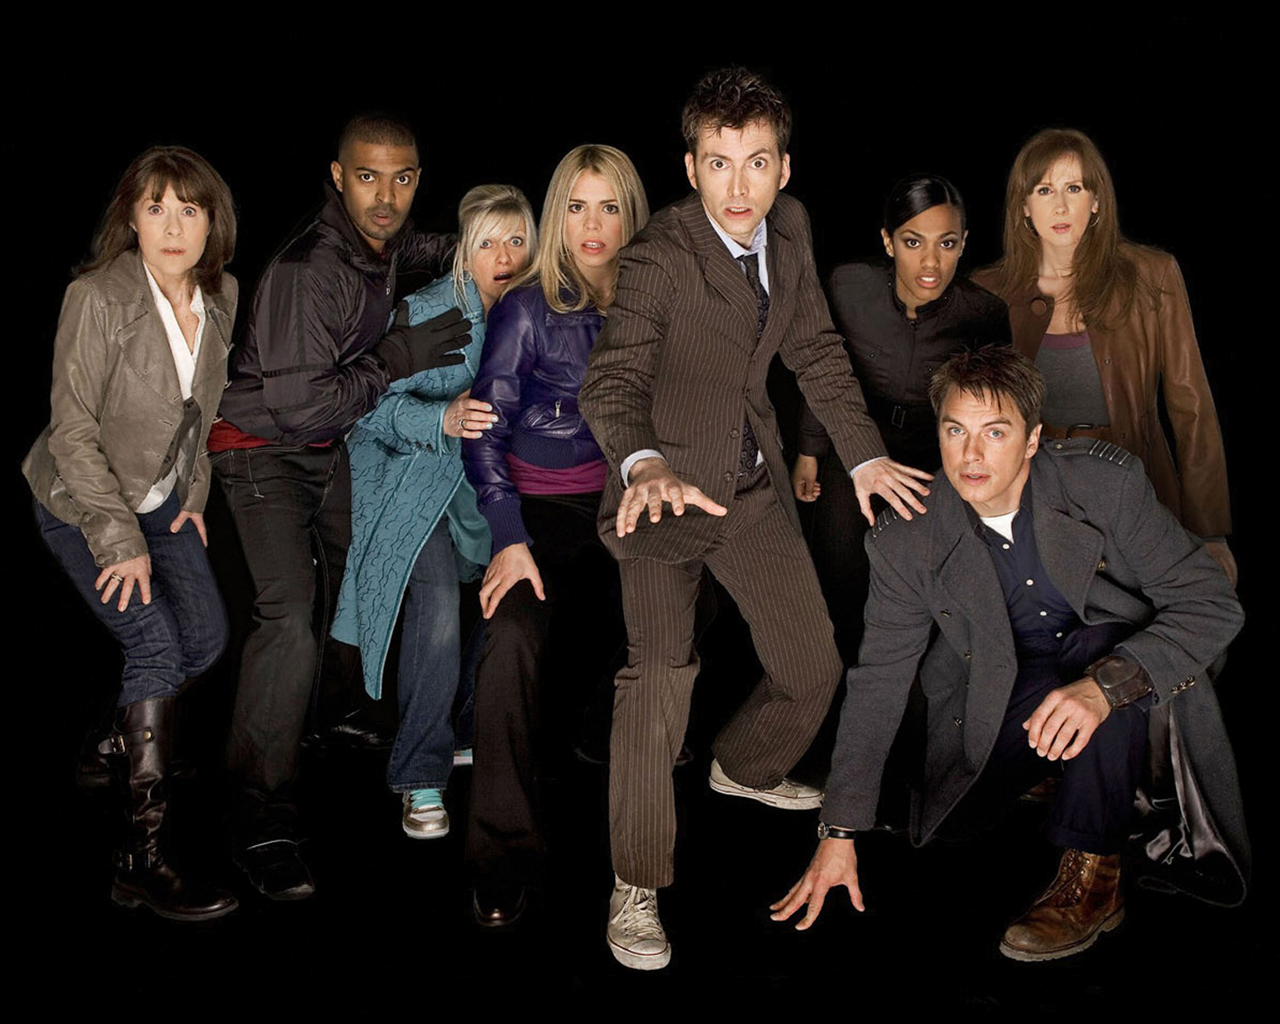 1920x1080 Background the doctor, doctor who, tv show, captian jack harkness, sarah jane smith